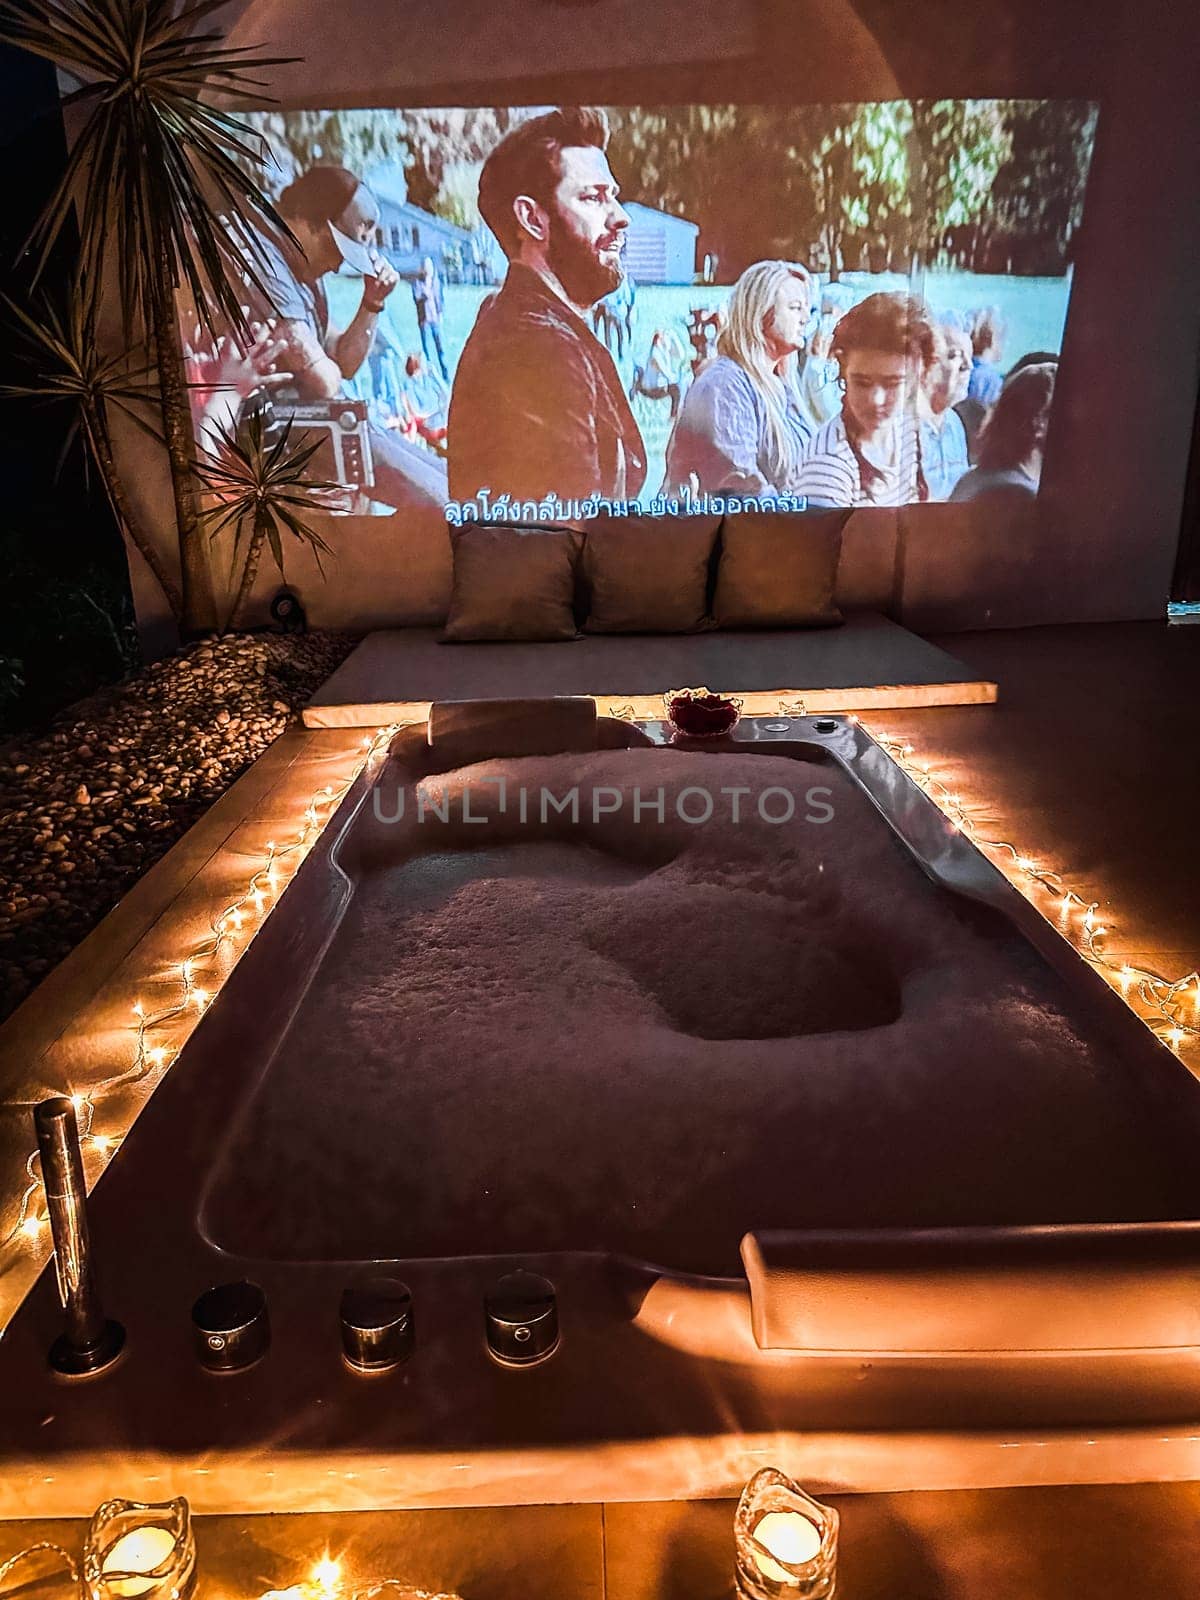 Night jacuzzi bathtub with movie projection in Doi Chang in Chiang Rai, Thailand, south east asia